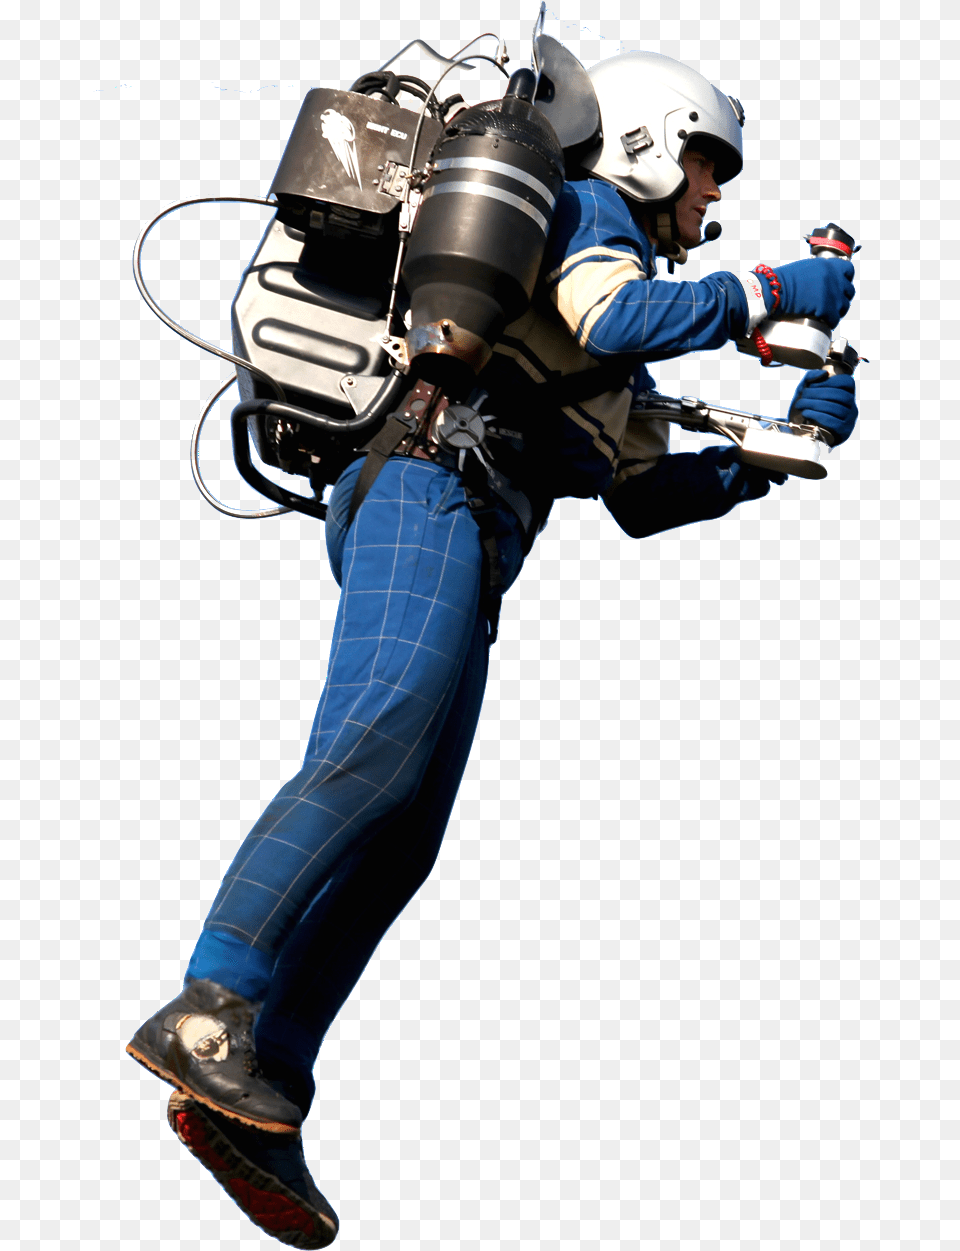 Jetpack A1 Guy With A Jetpack, Helmet, Clothing, Hardhat, Woman Png